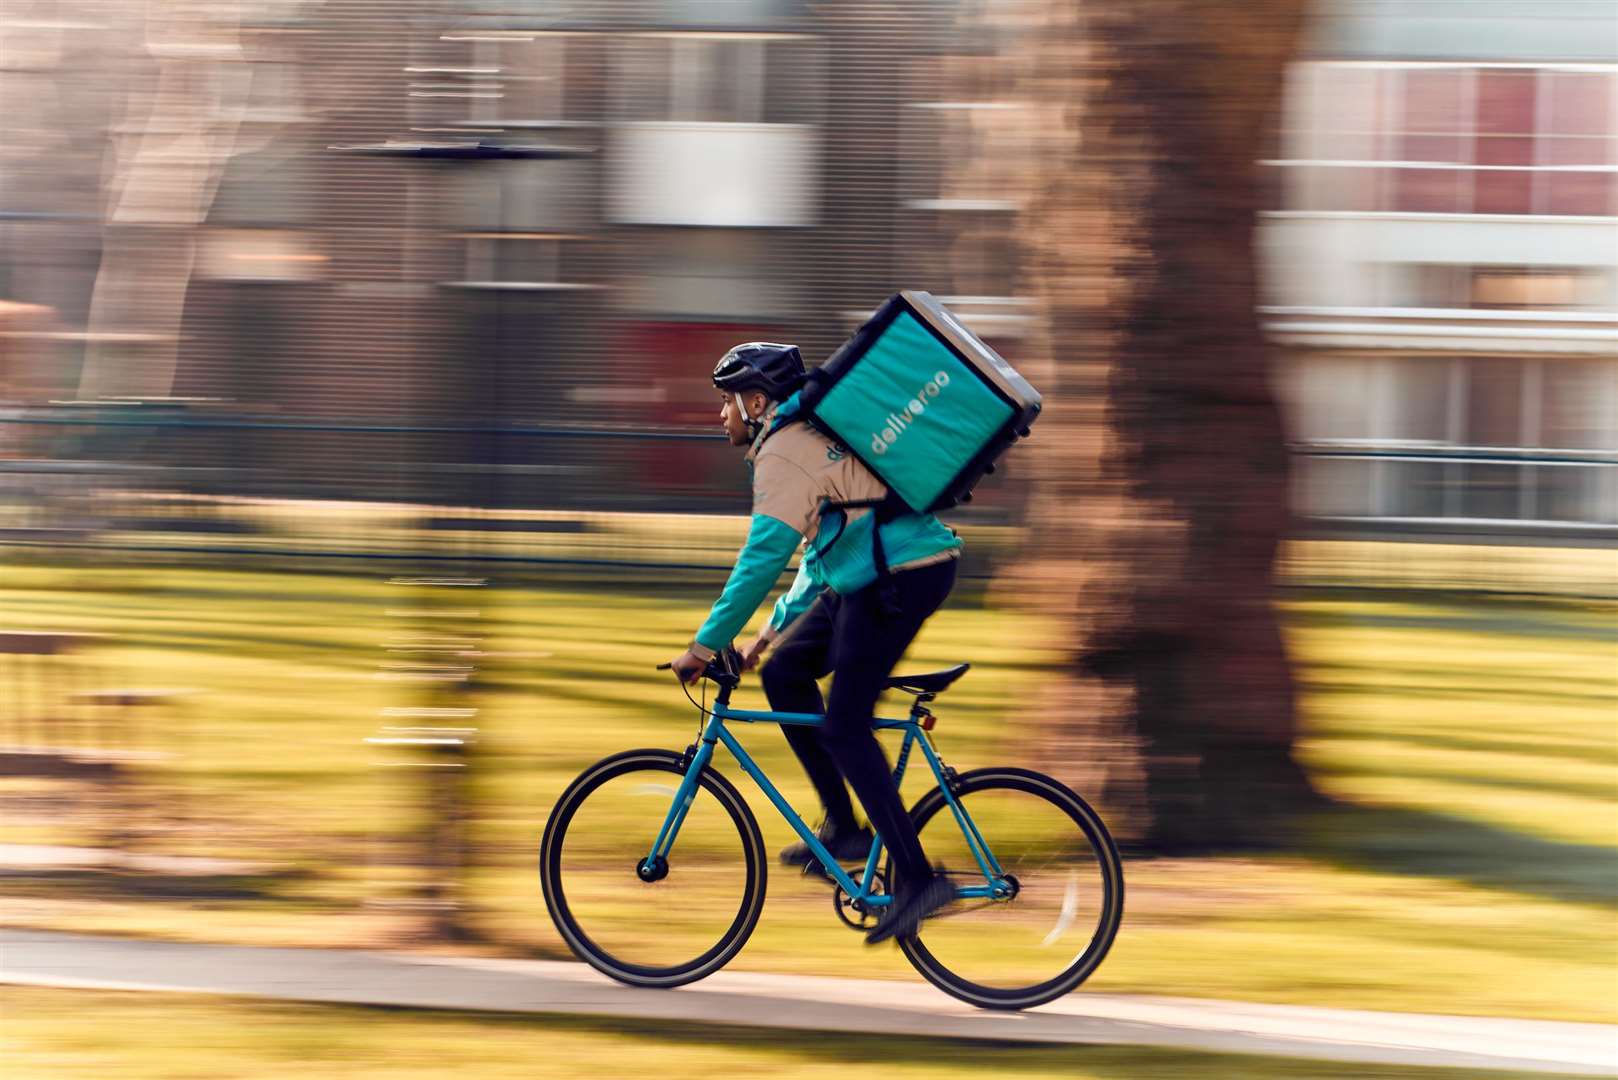 Deliveroo arrived in Canterbury back in 2016. Picture: Mikael Buck / Deliveroo